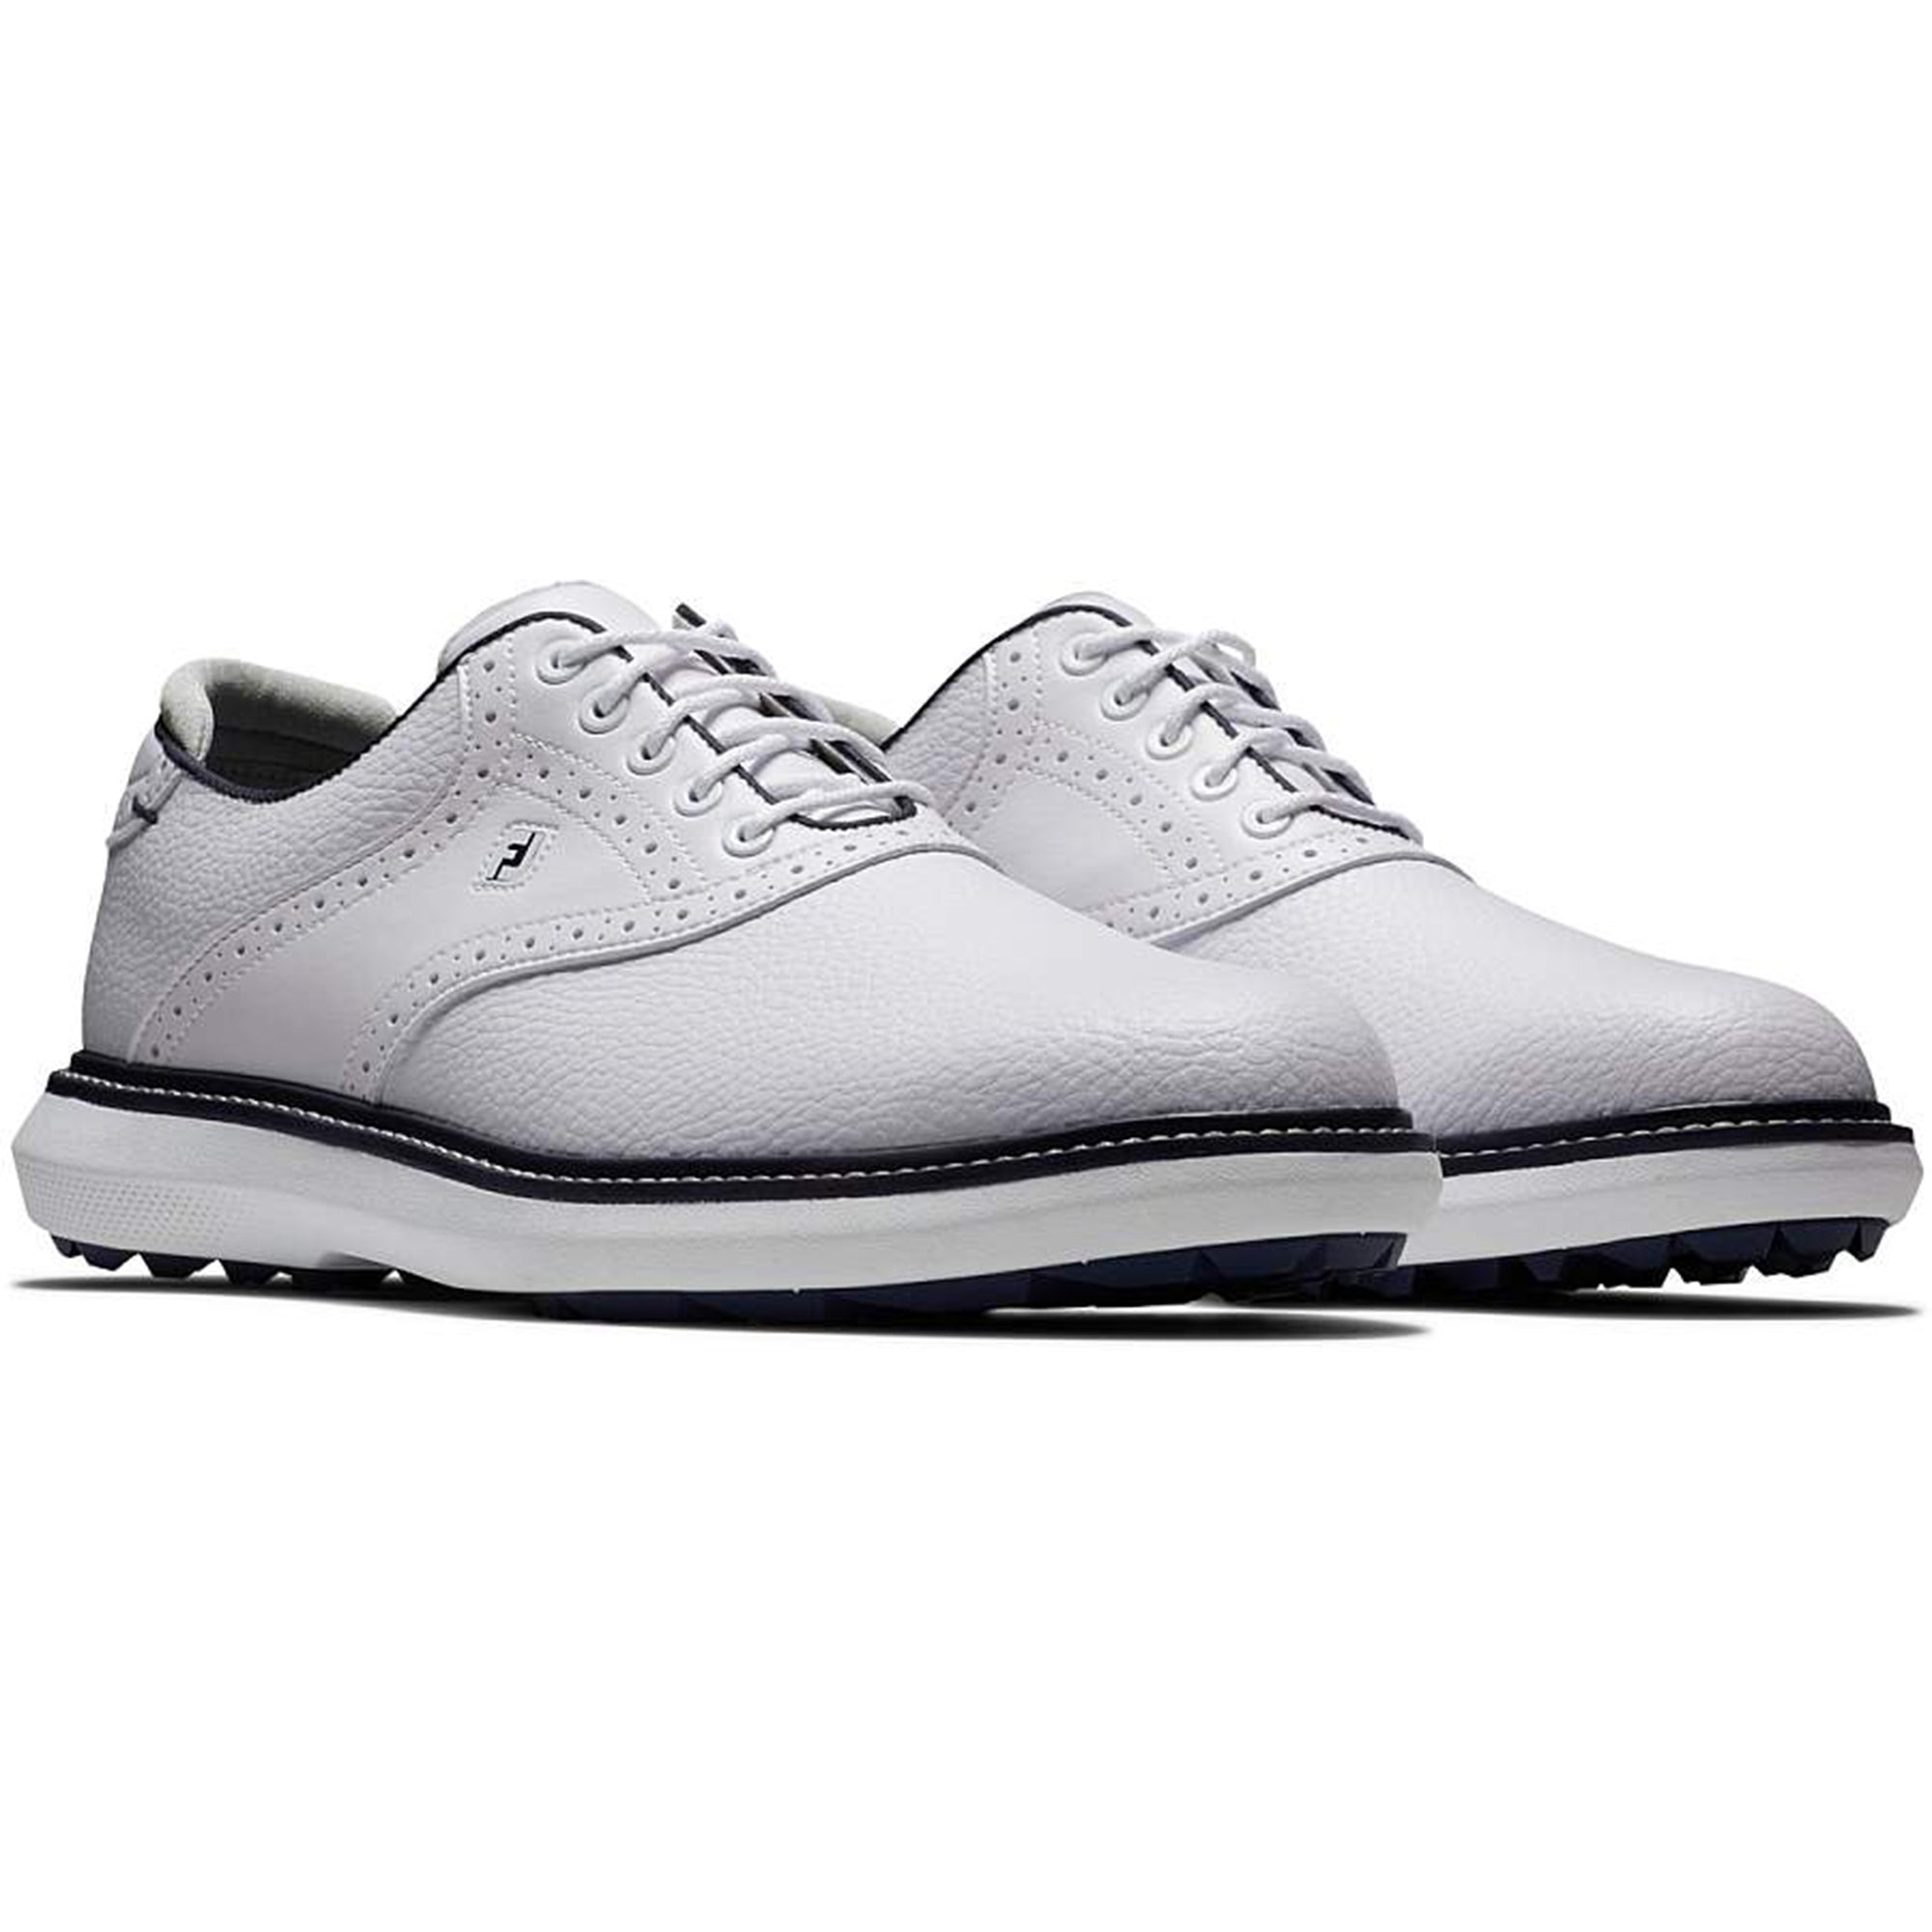 FootJoy 23 Traditions Spikeless